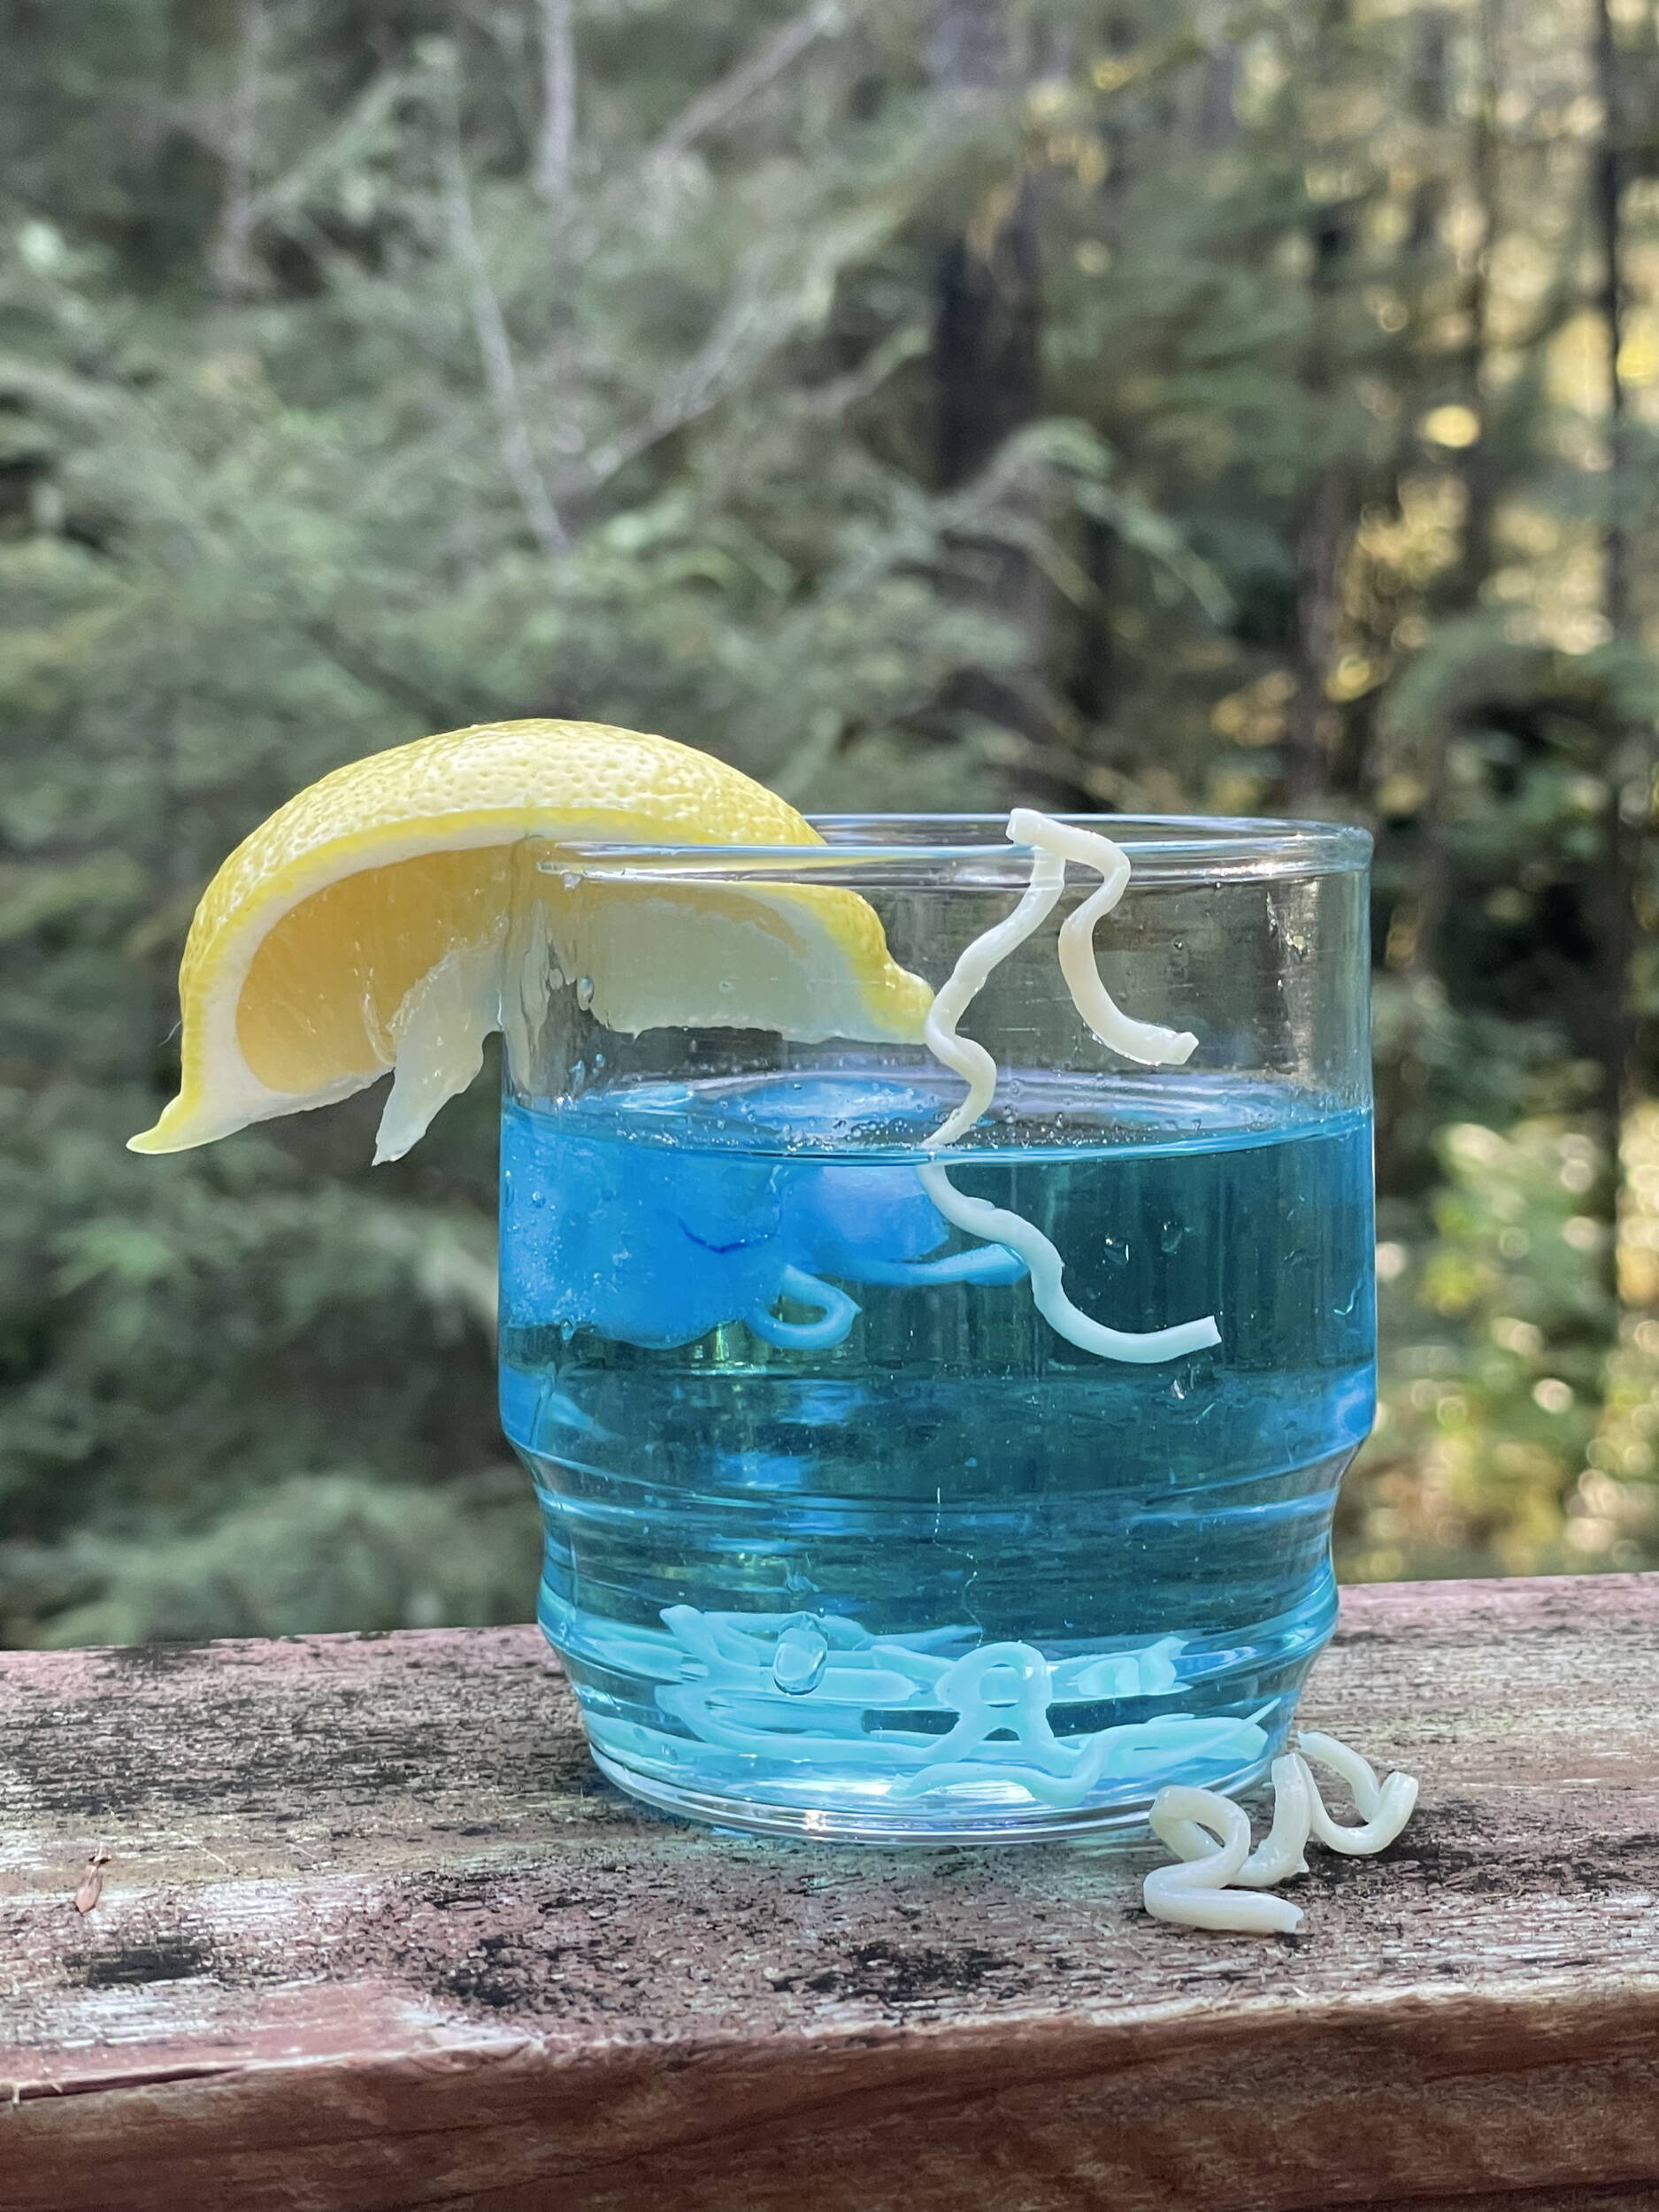 Commemorating Stroller White’s most famous column, the contributor created a mock Ice Worm Cocktail using blue food coloring in a glass of water with ramen noodles. The citrus slice celebrates one of newspaperman White’s enduring phrases to “put a squirt of lemon in it.” (Photo by Laurie Craig)